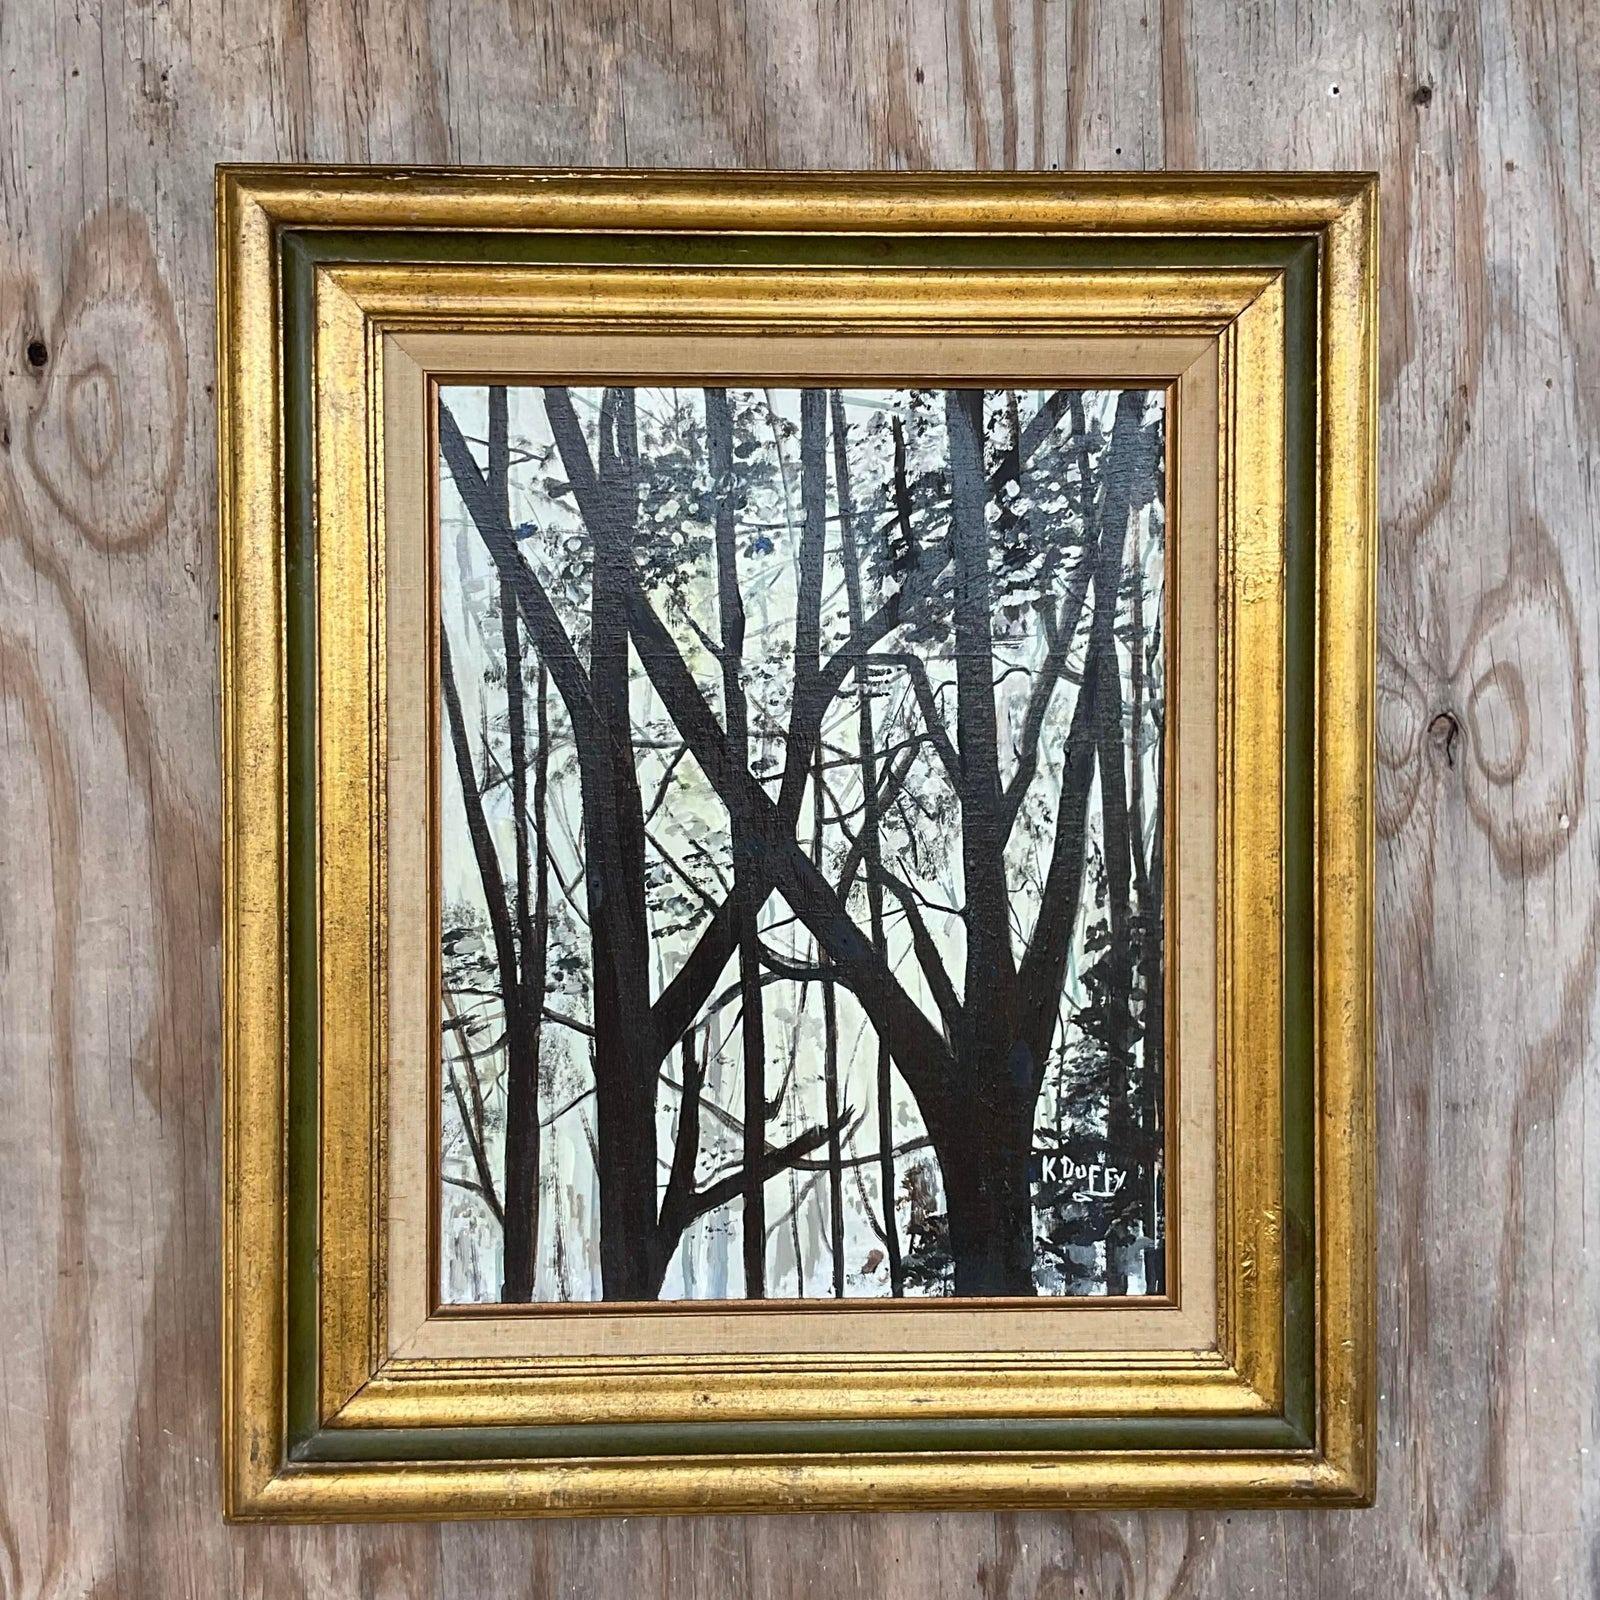 A fantastic vintage painting of a forest in black and white. Acquired at a Palm Beach estate.